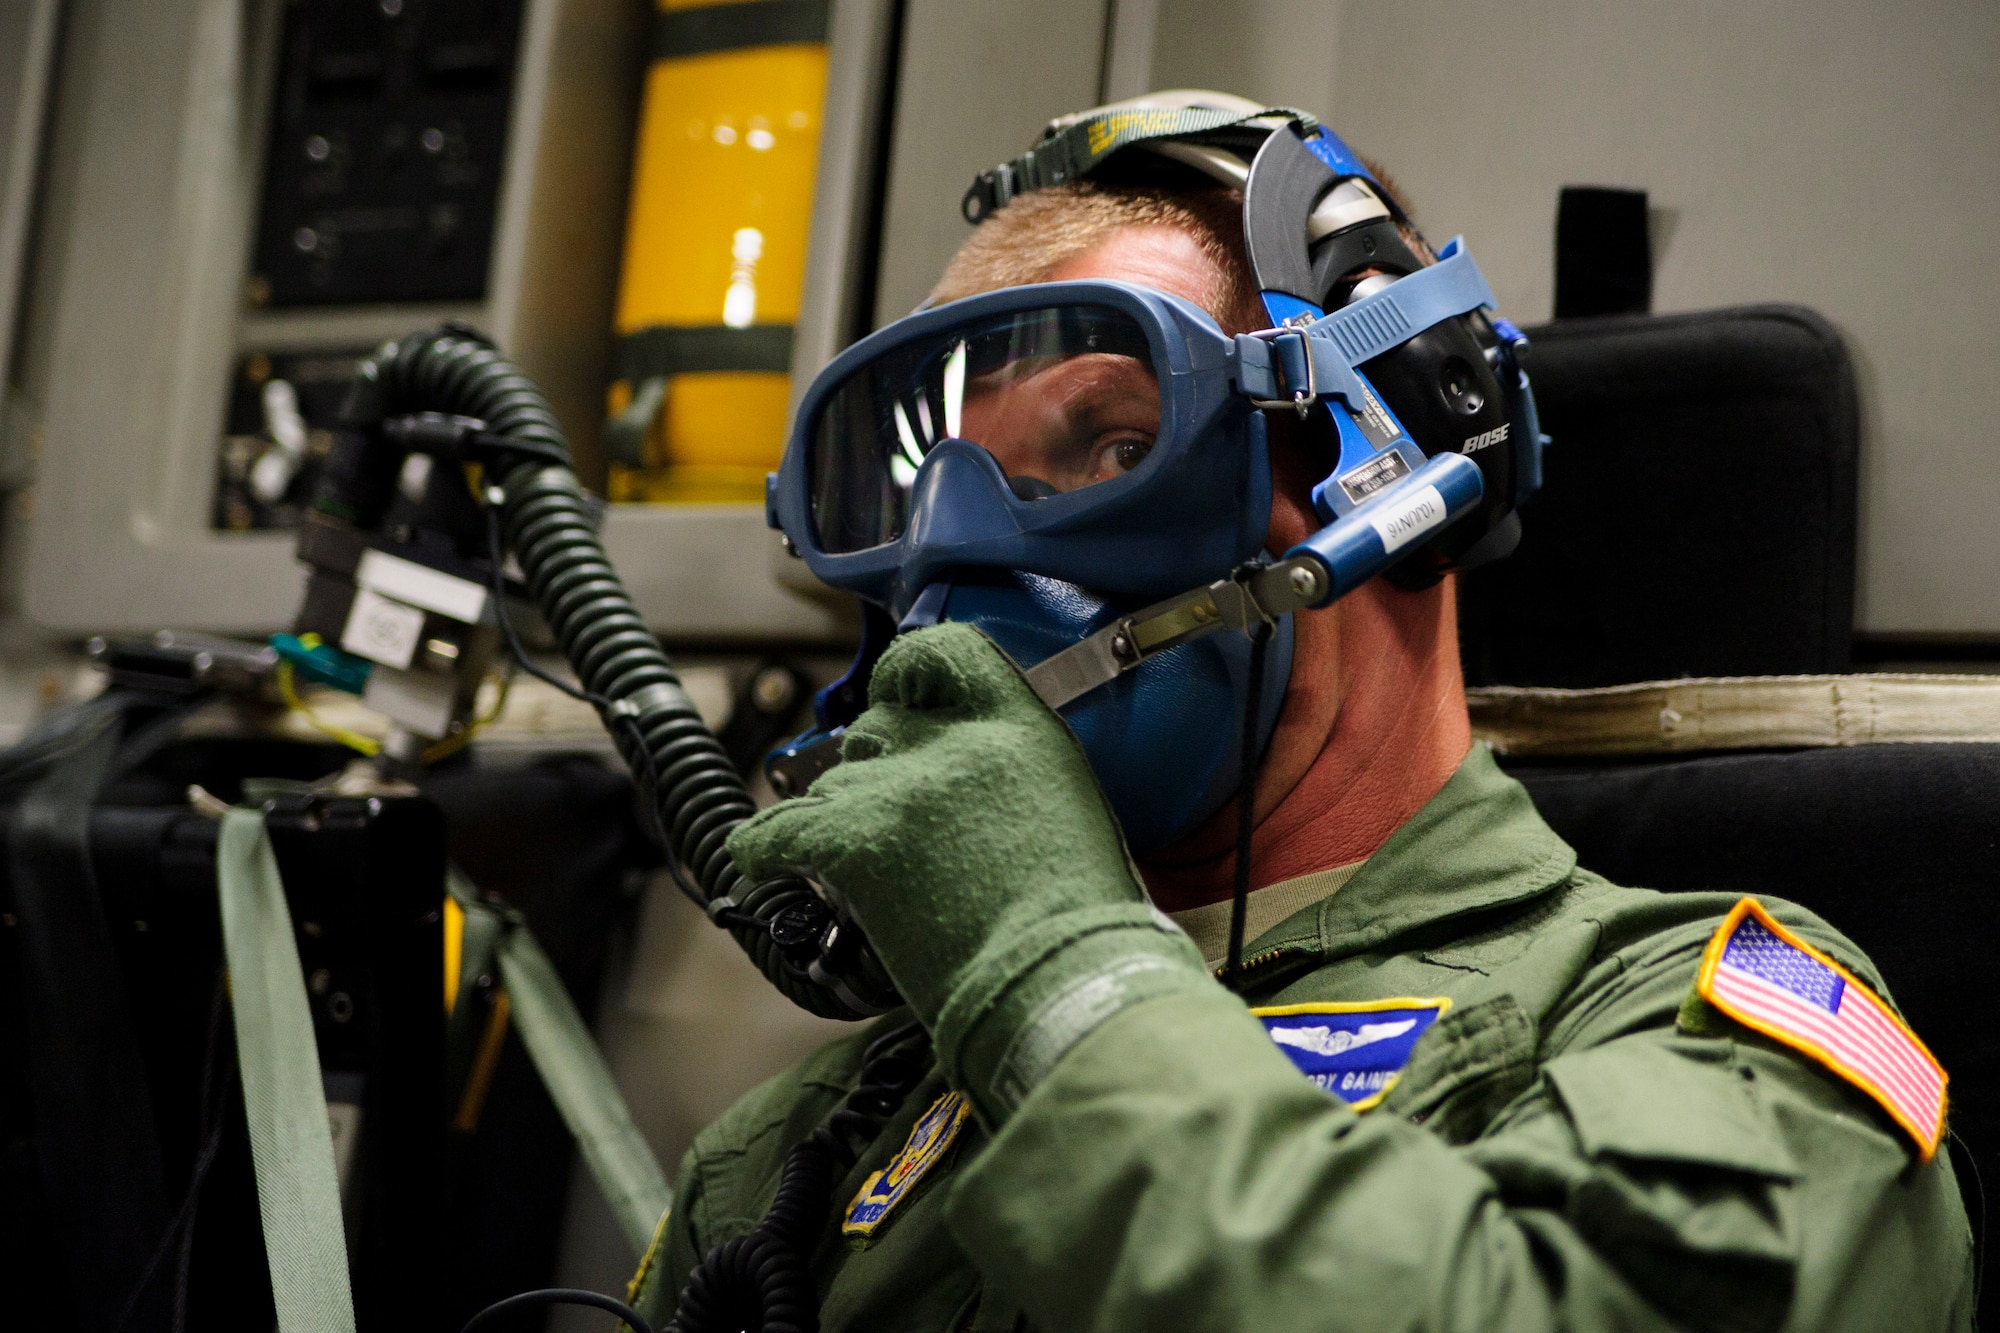 Master Sgt. Gregory Gaines, 315th Aeromedical Evacuation Squadron aeromedical technician, conducts training operations with the support from Civil Air Patrol volunteers onboard a C-17 Globemaster III, assigned to the 300th Airlift Squadron, near Joint Base Charleston, S.C., May 18, 2016. The squadrons conducted the training to enhance their ability to receive, regulate, transport and track patients to and from Natural Disaster Medical System hospitals near Greenville-Spartanburg International Airport. (U.S. Air Force photo by Senior Airman Jonathan Lane)